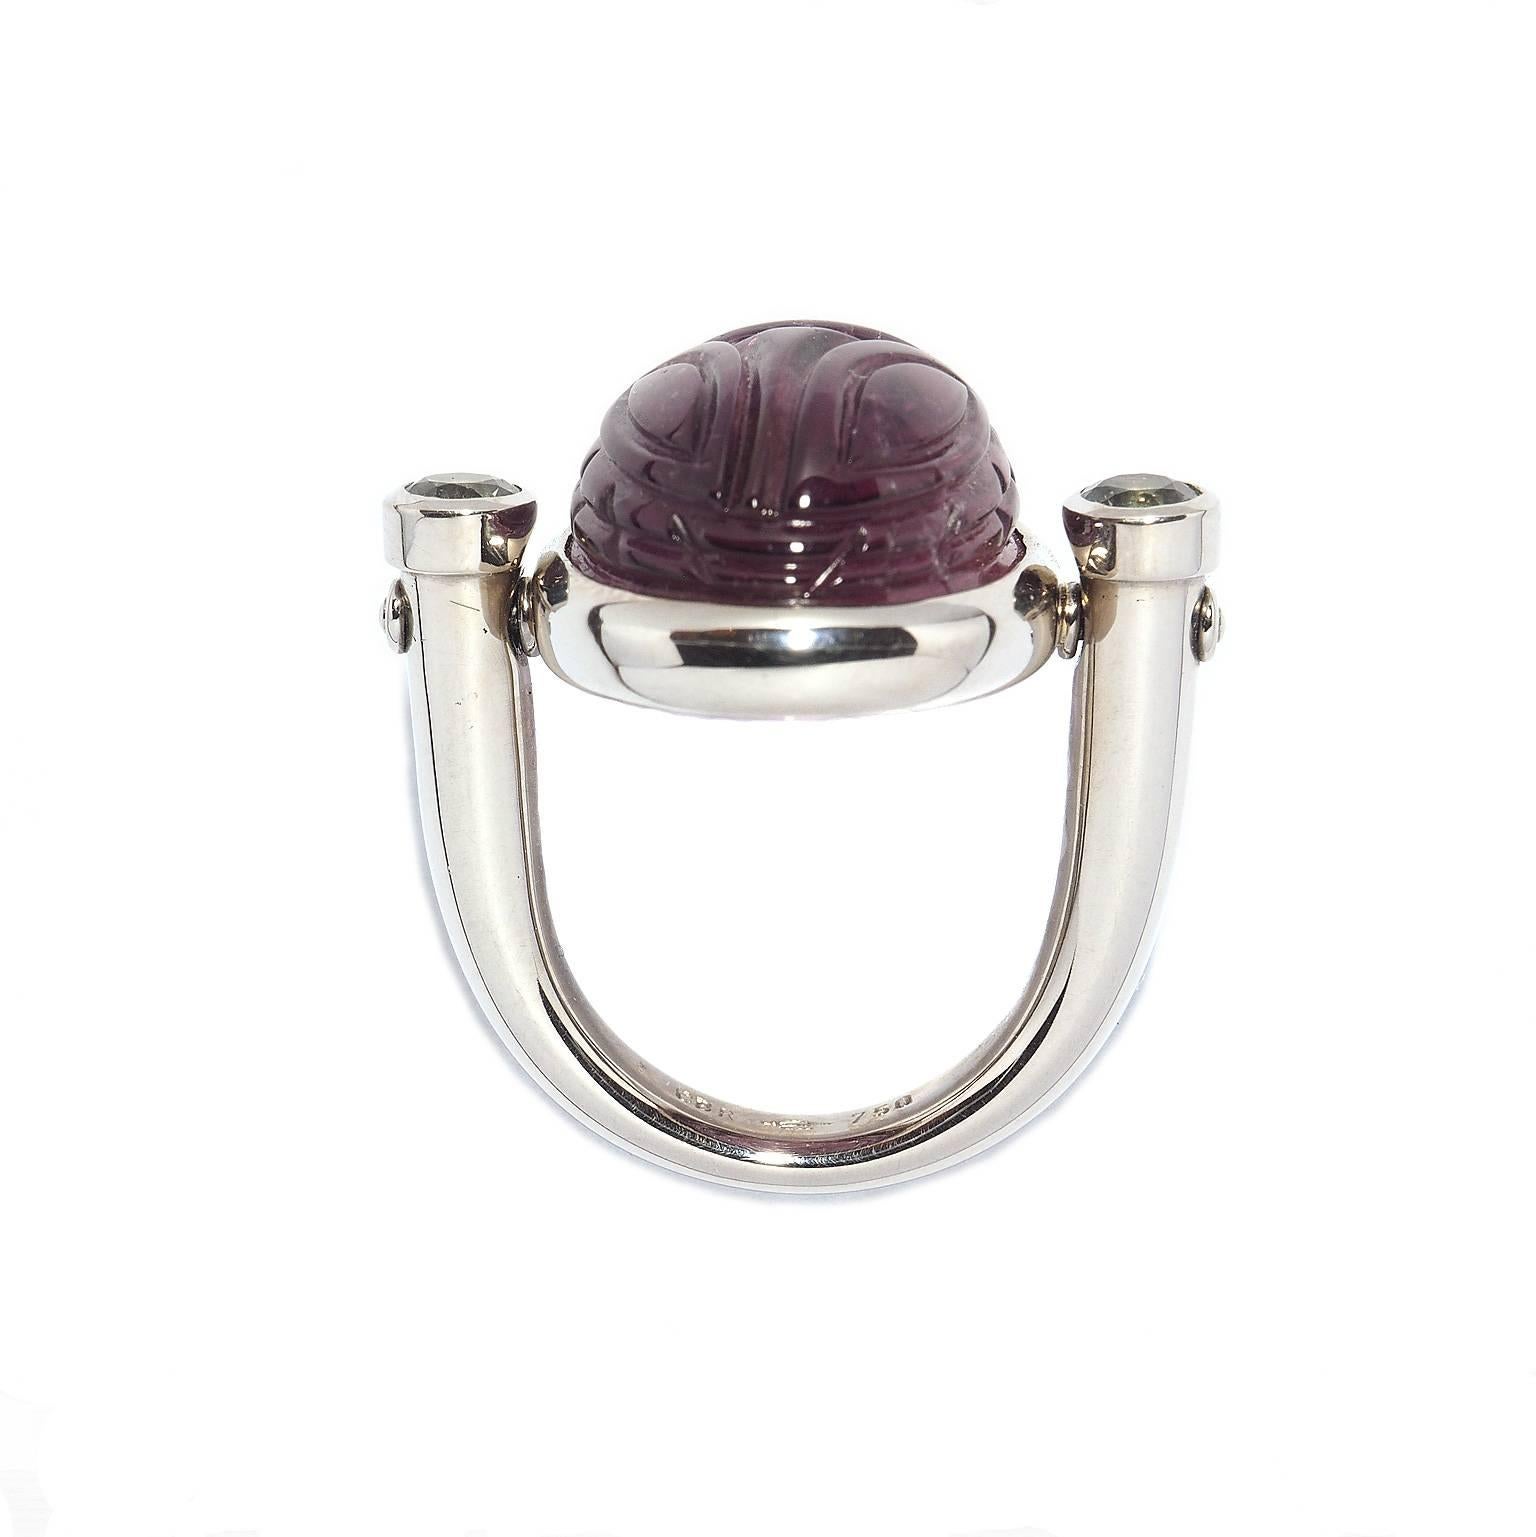 In old Egypt the scarab was a symbol for resurrection and life and since that time a lucky charm for everyone. This desirable ring in size 57 with one rubellite 22.44 ct and two sapphires 0.68 ct could be your personal lucky charm!
The middle part